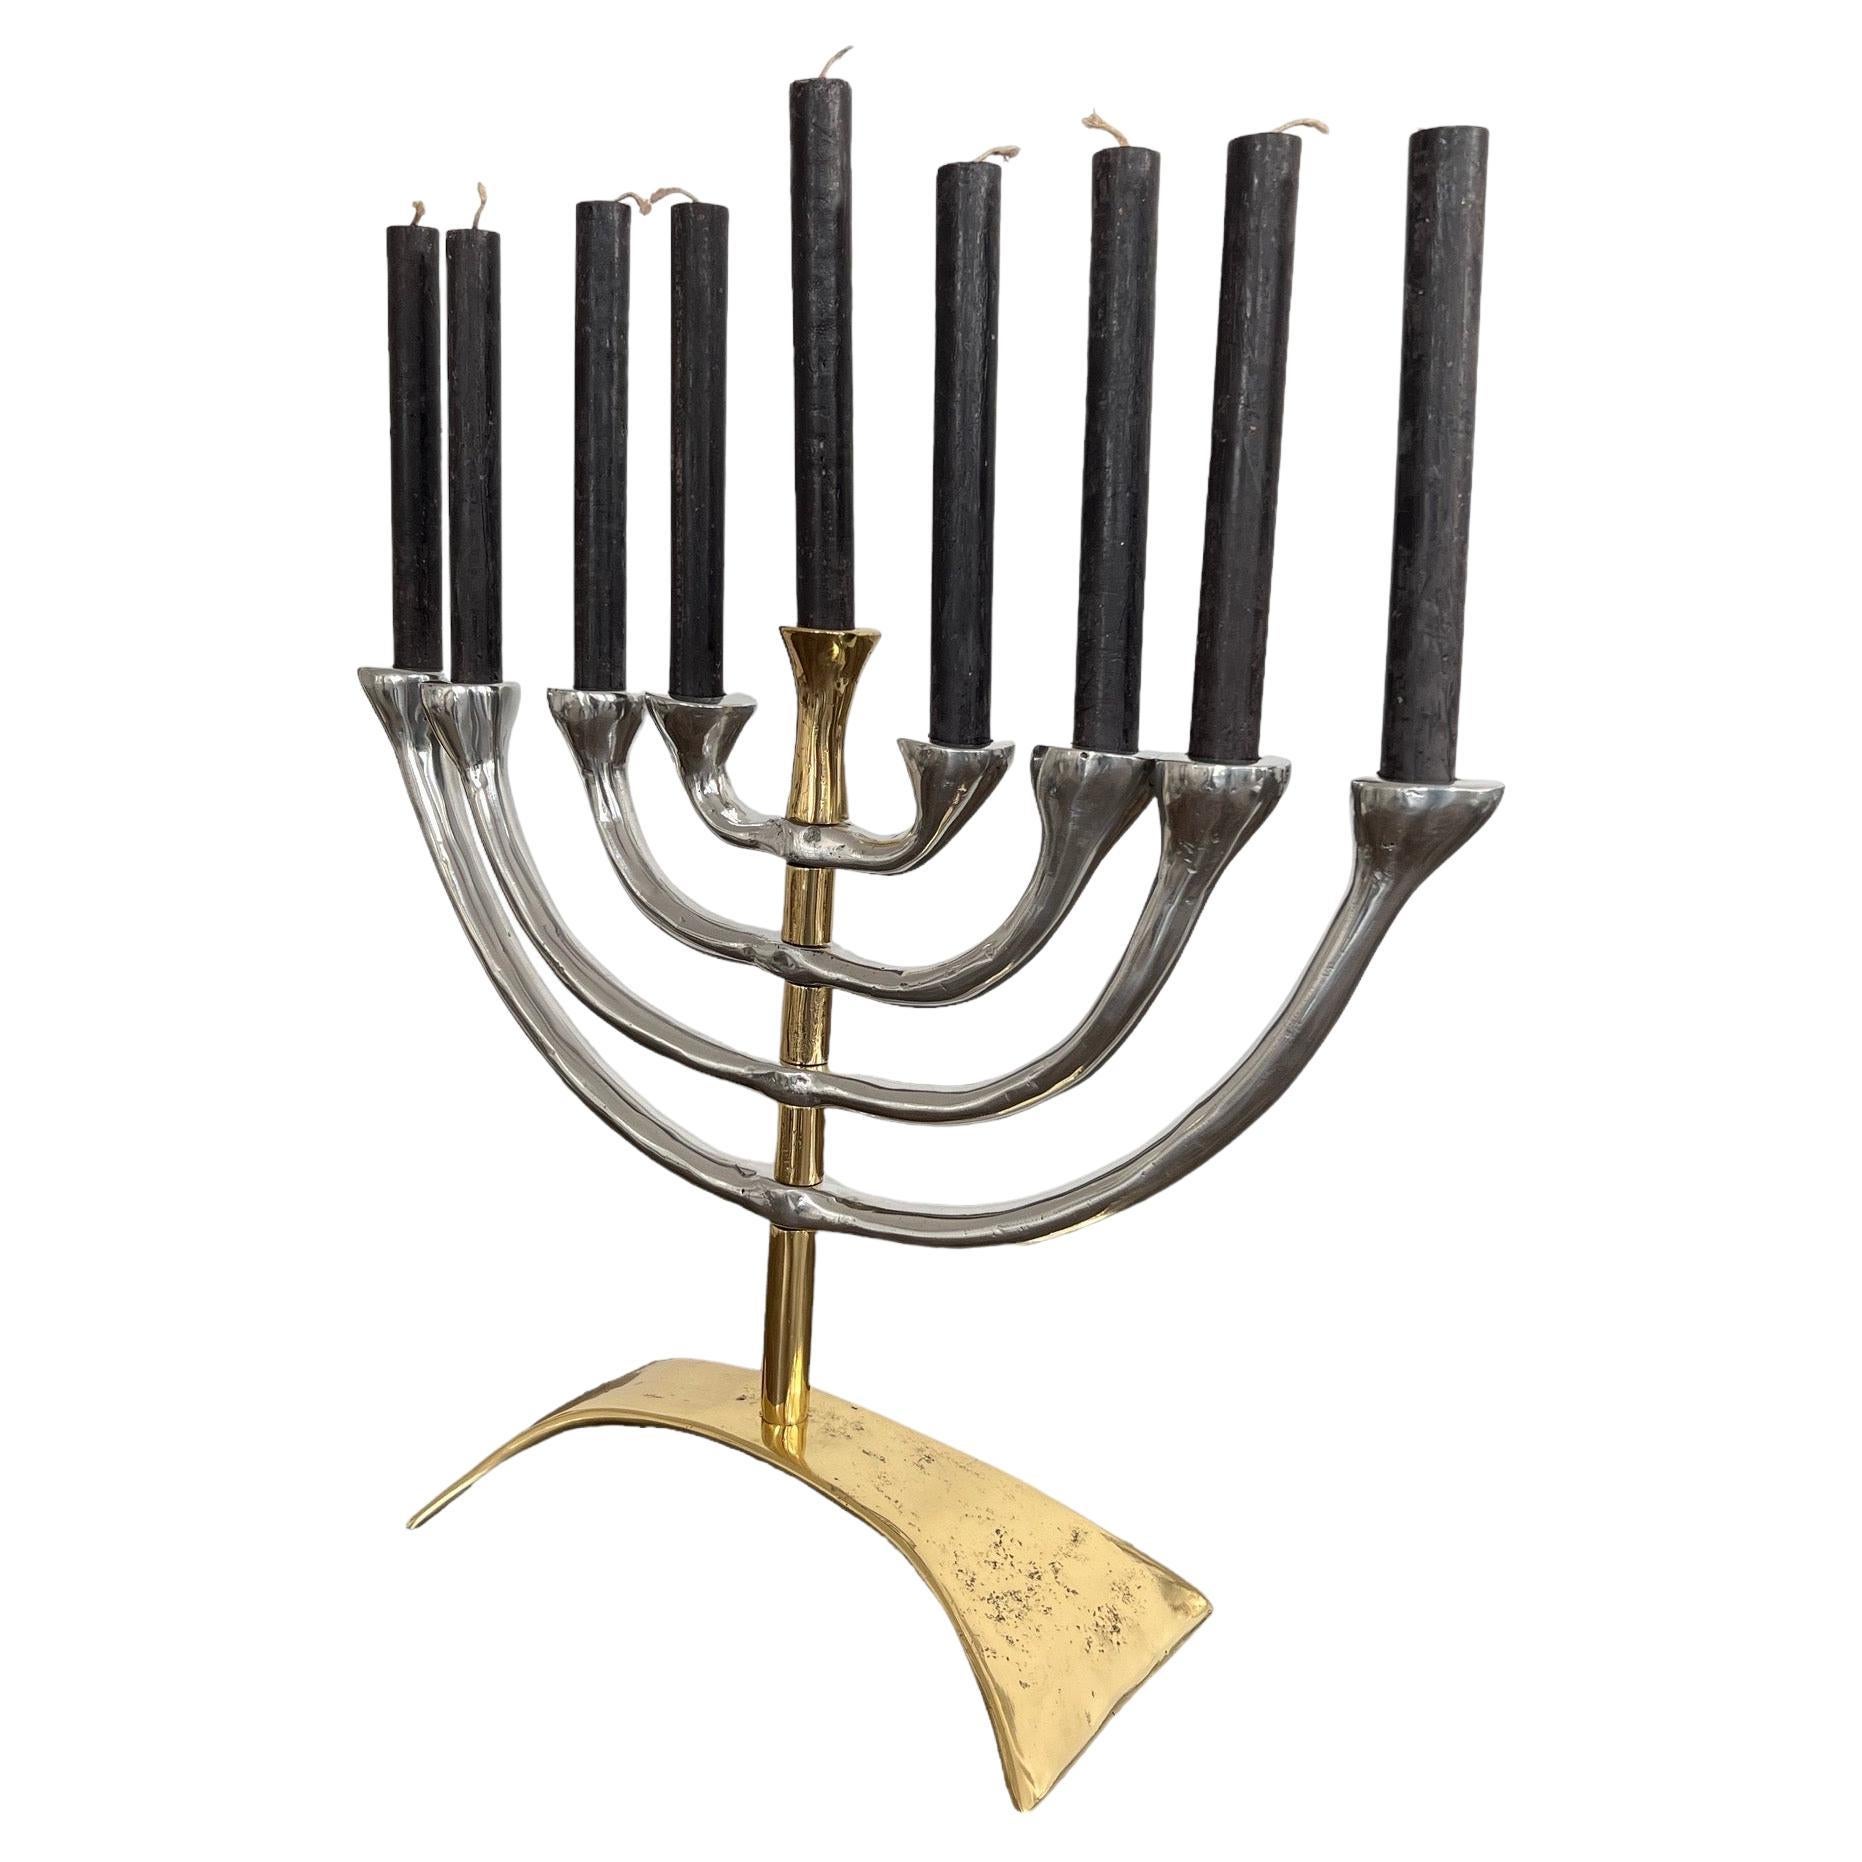 Classic Menorah G018 9arms Solid Cast Brass and Aluminum Handmade in Spain